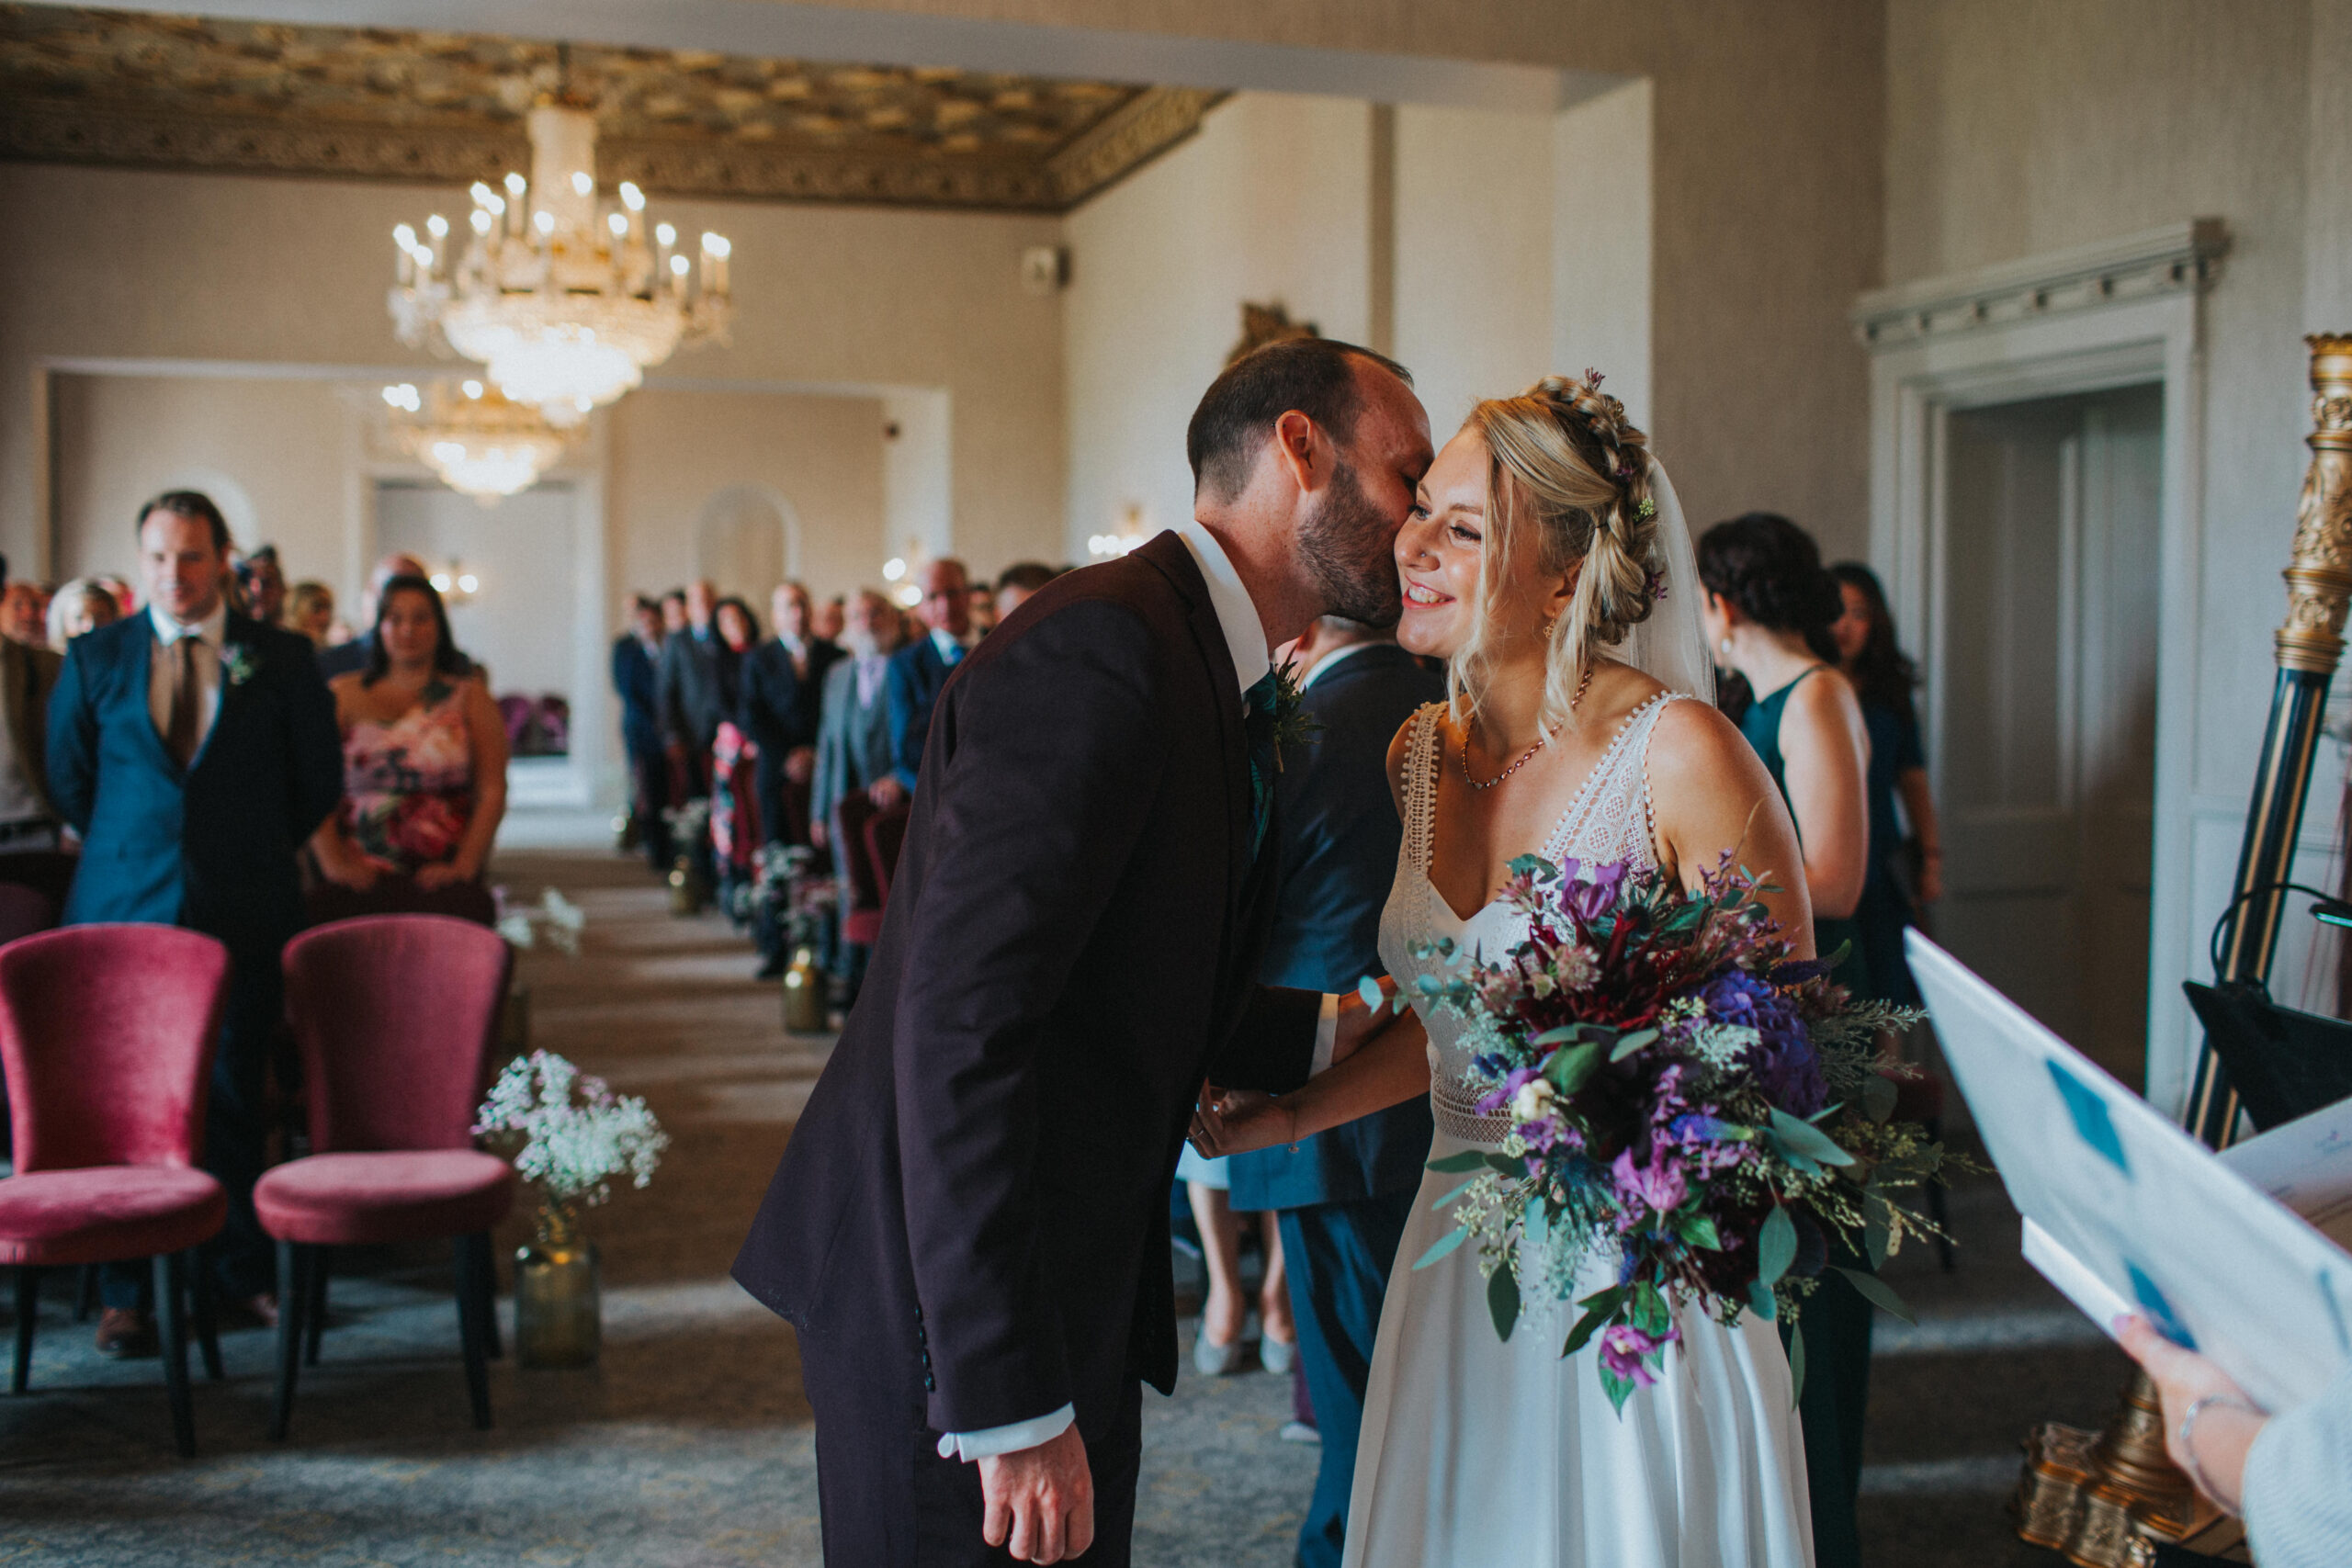 Humanist love story captured in Walton Hall's beauty